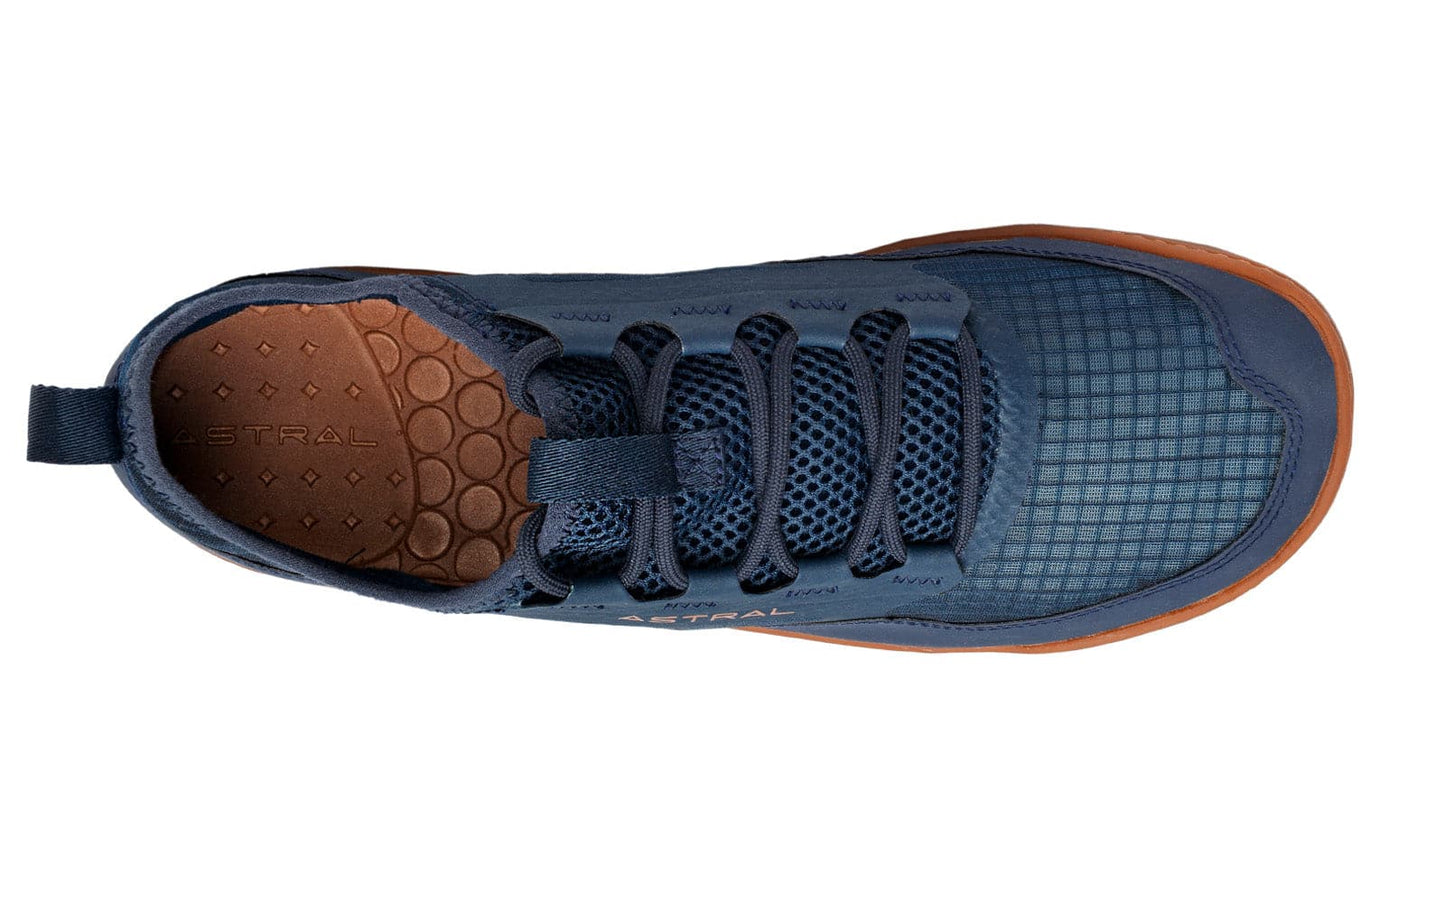 Featuring the Loyak AC - Men's men's footwear manufactured by Astral shown here from a ninth angle.